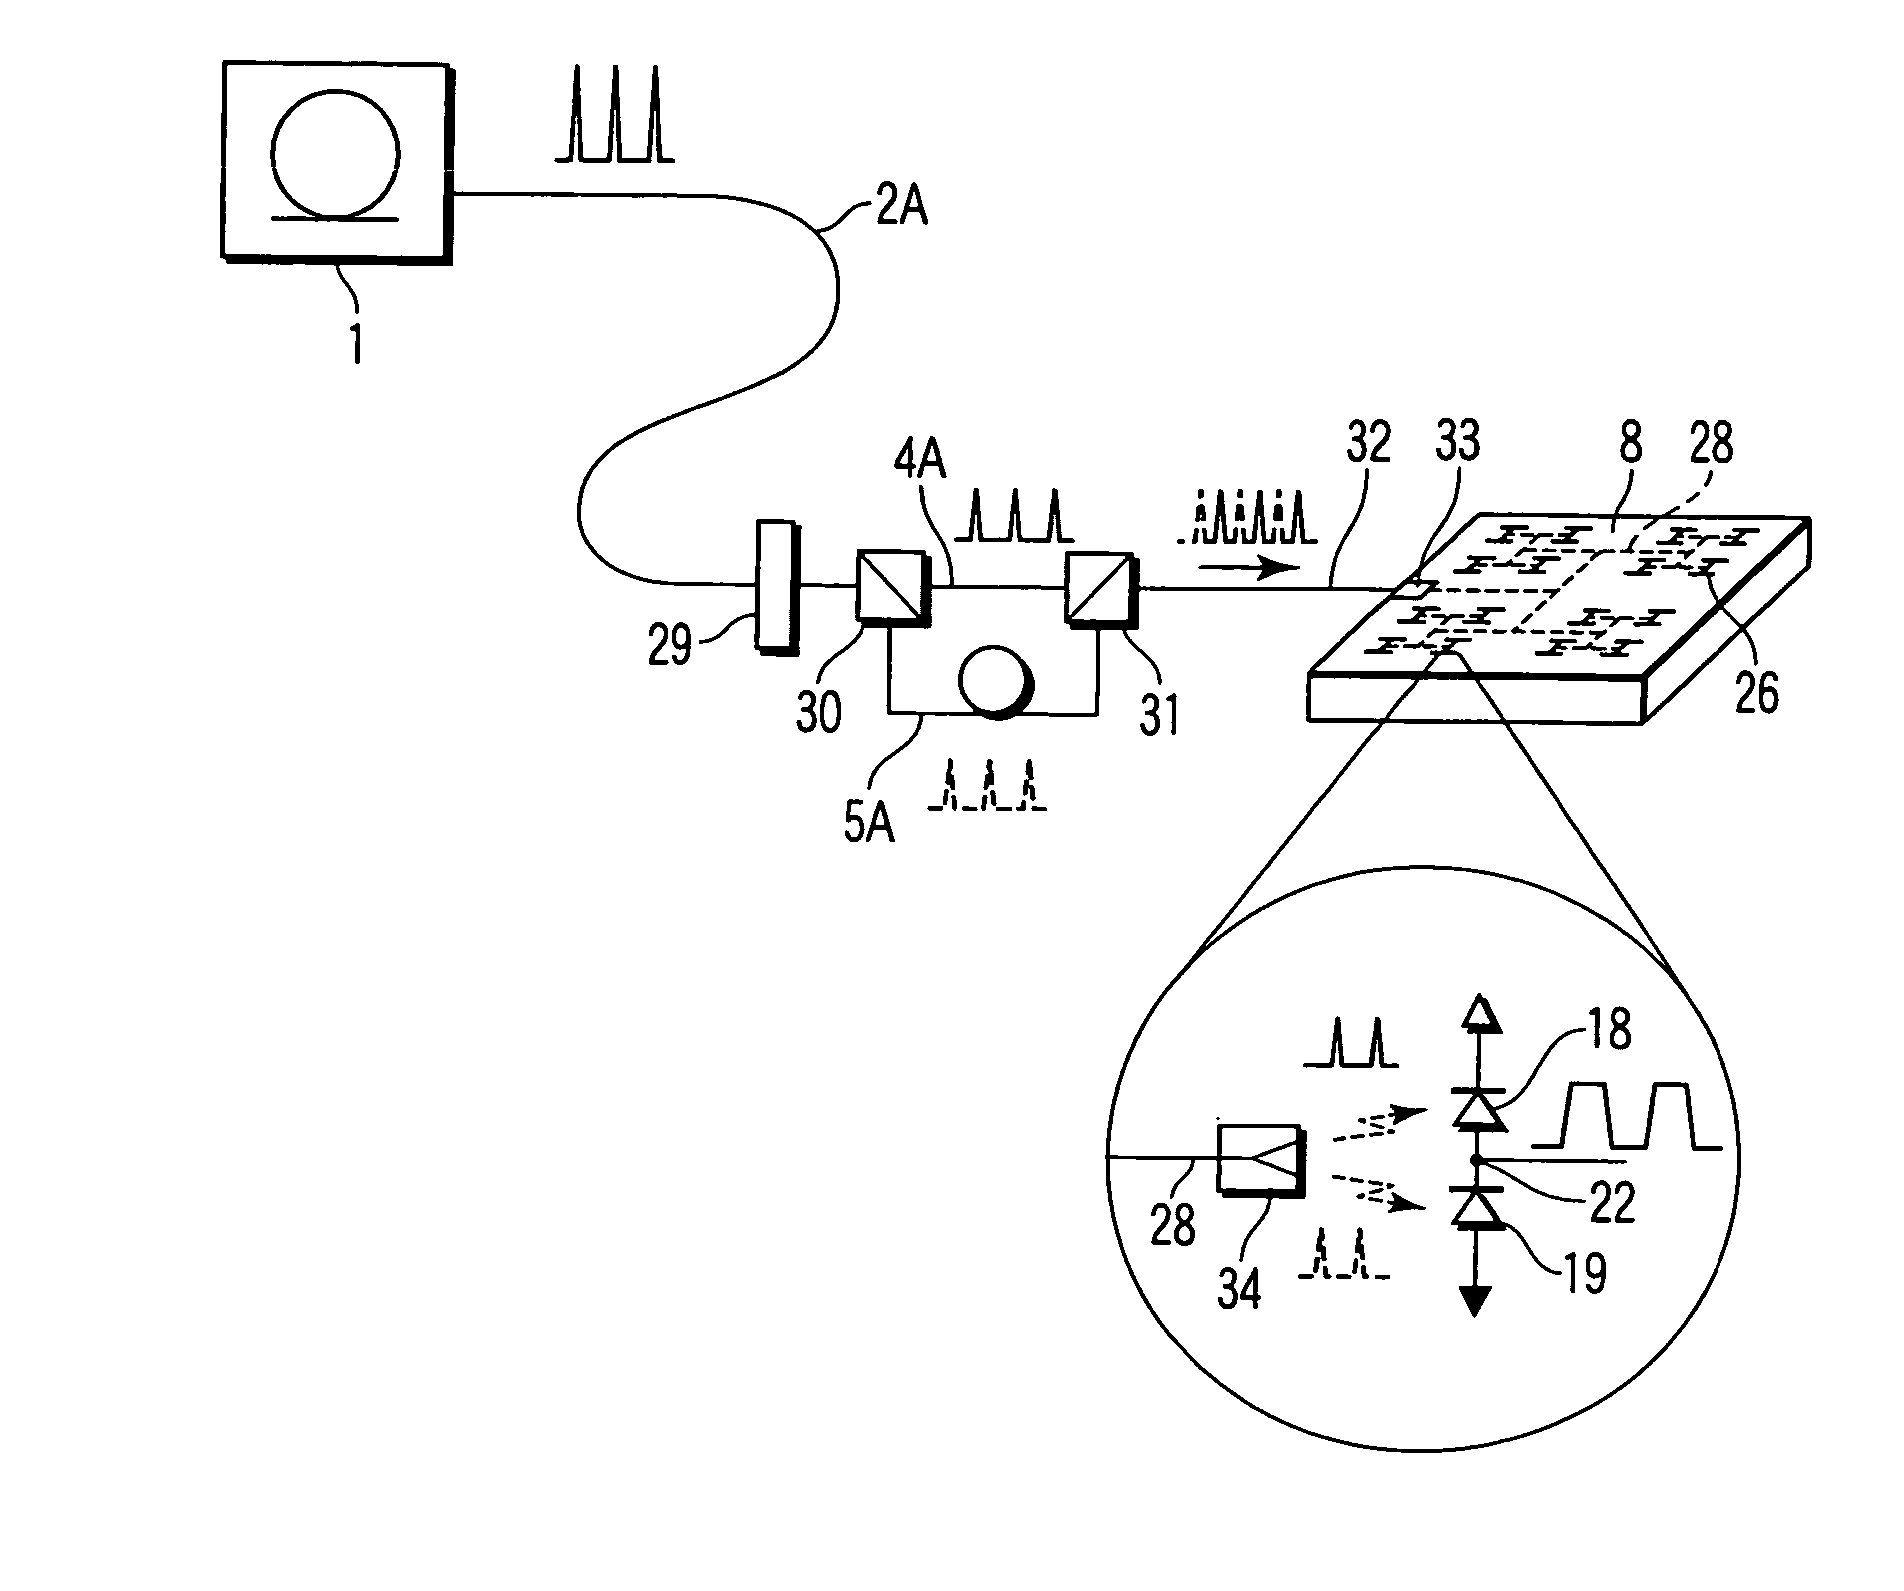 LSI apparatus operated by optical clock